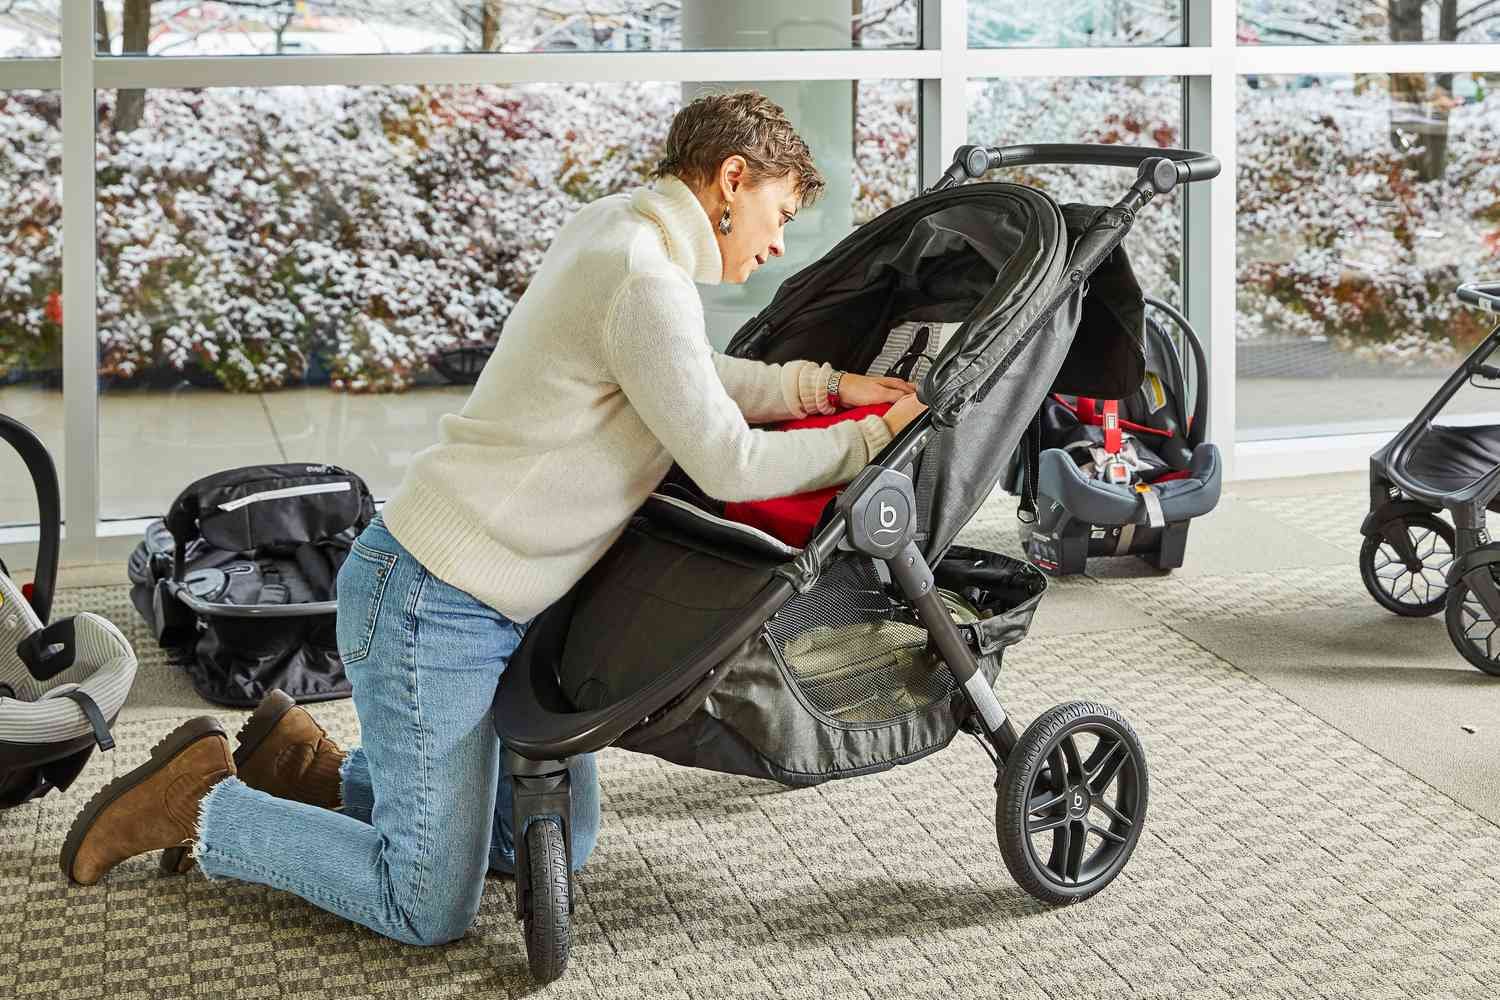 21 (Tested) Stroller Storage Ideas Guaranteed to Work!